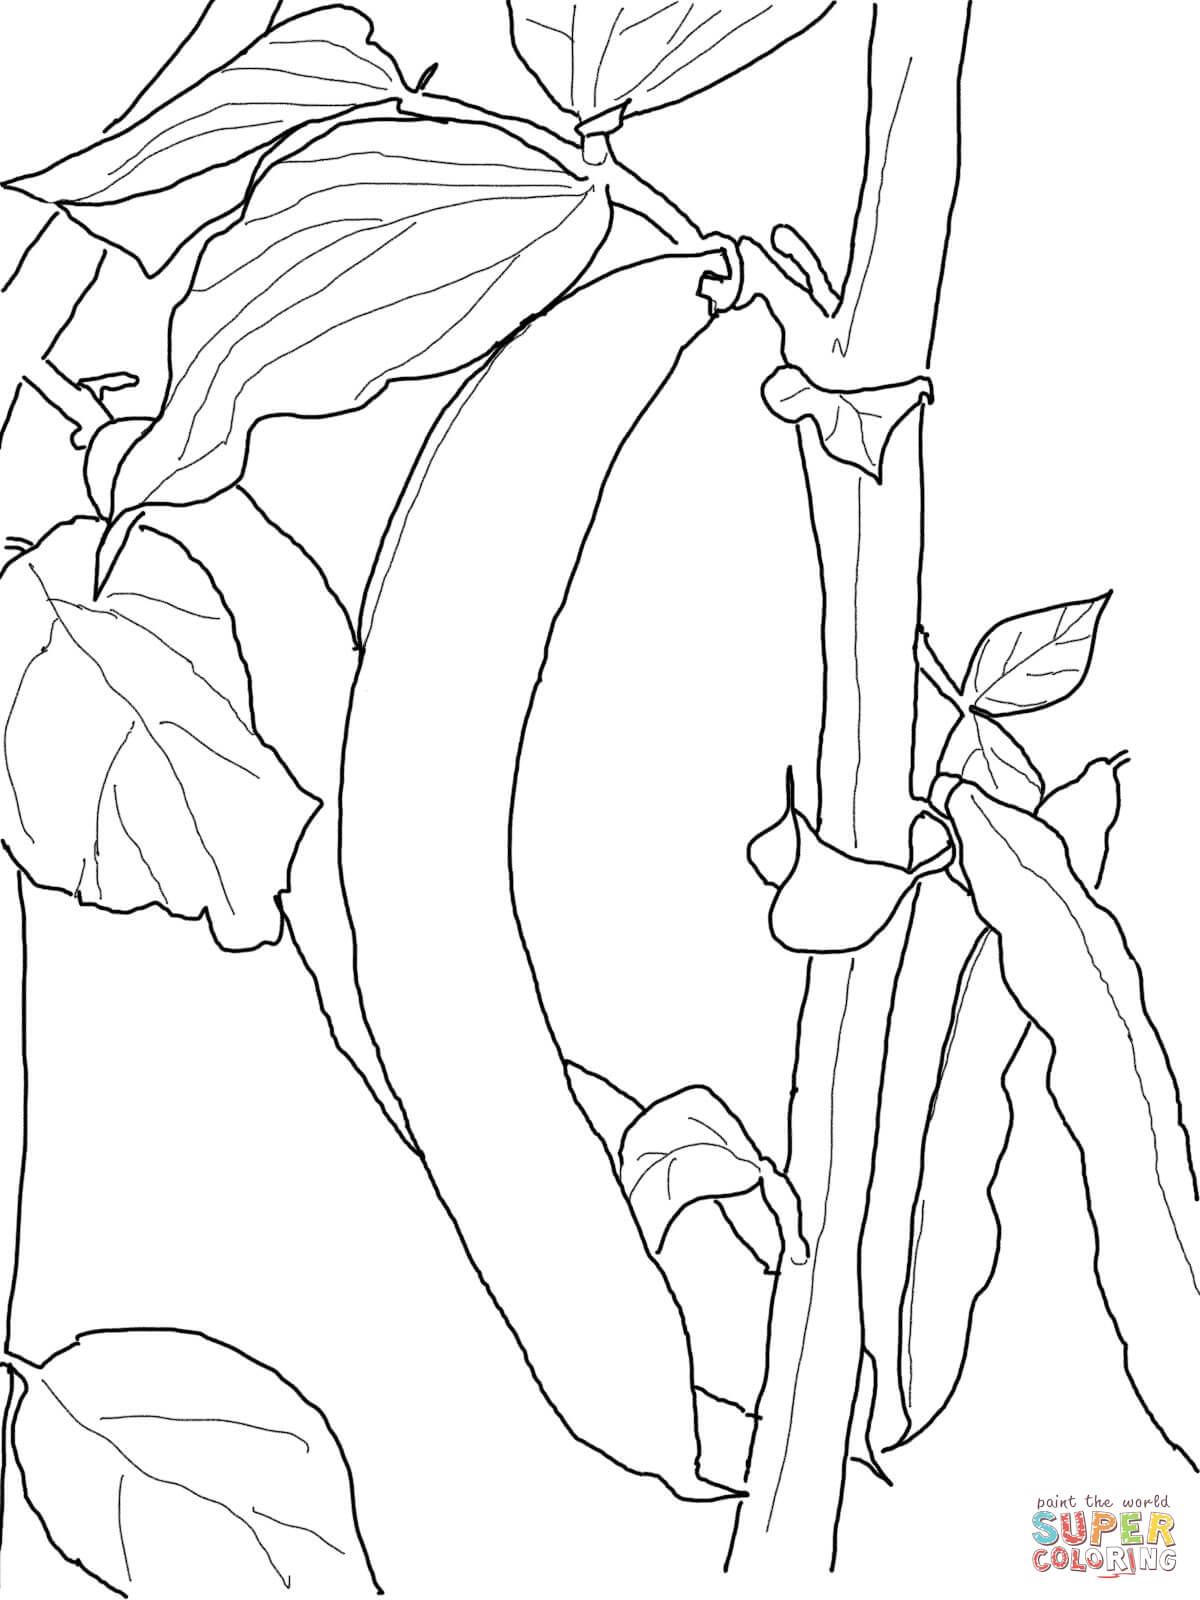 Green Beans Coloring Page Green Bean Coloring Page Free Printable Coloring Pages